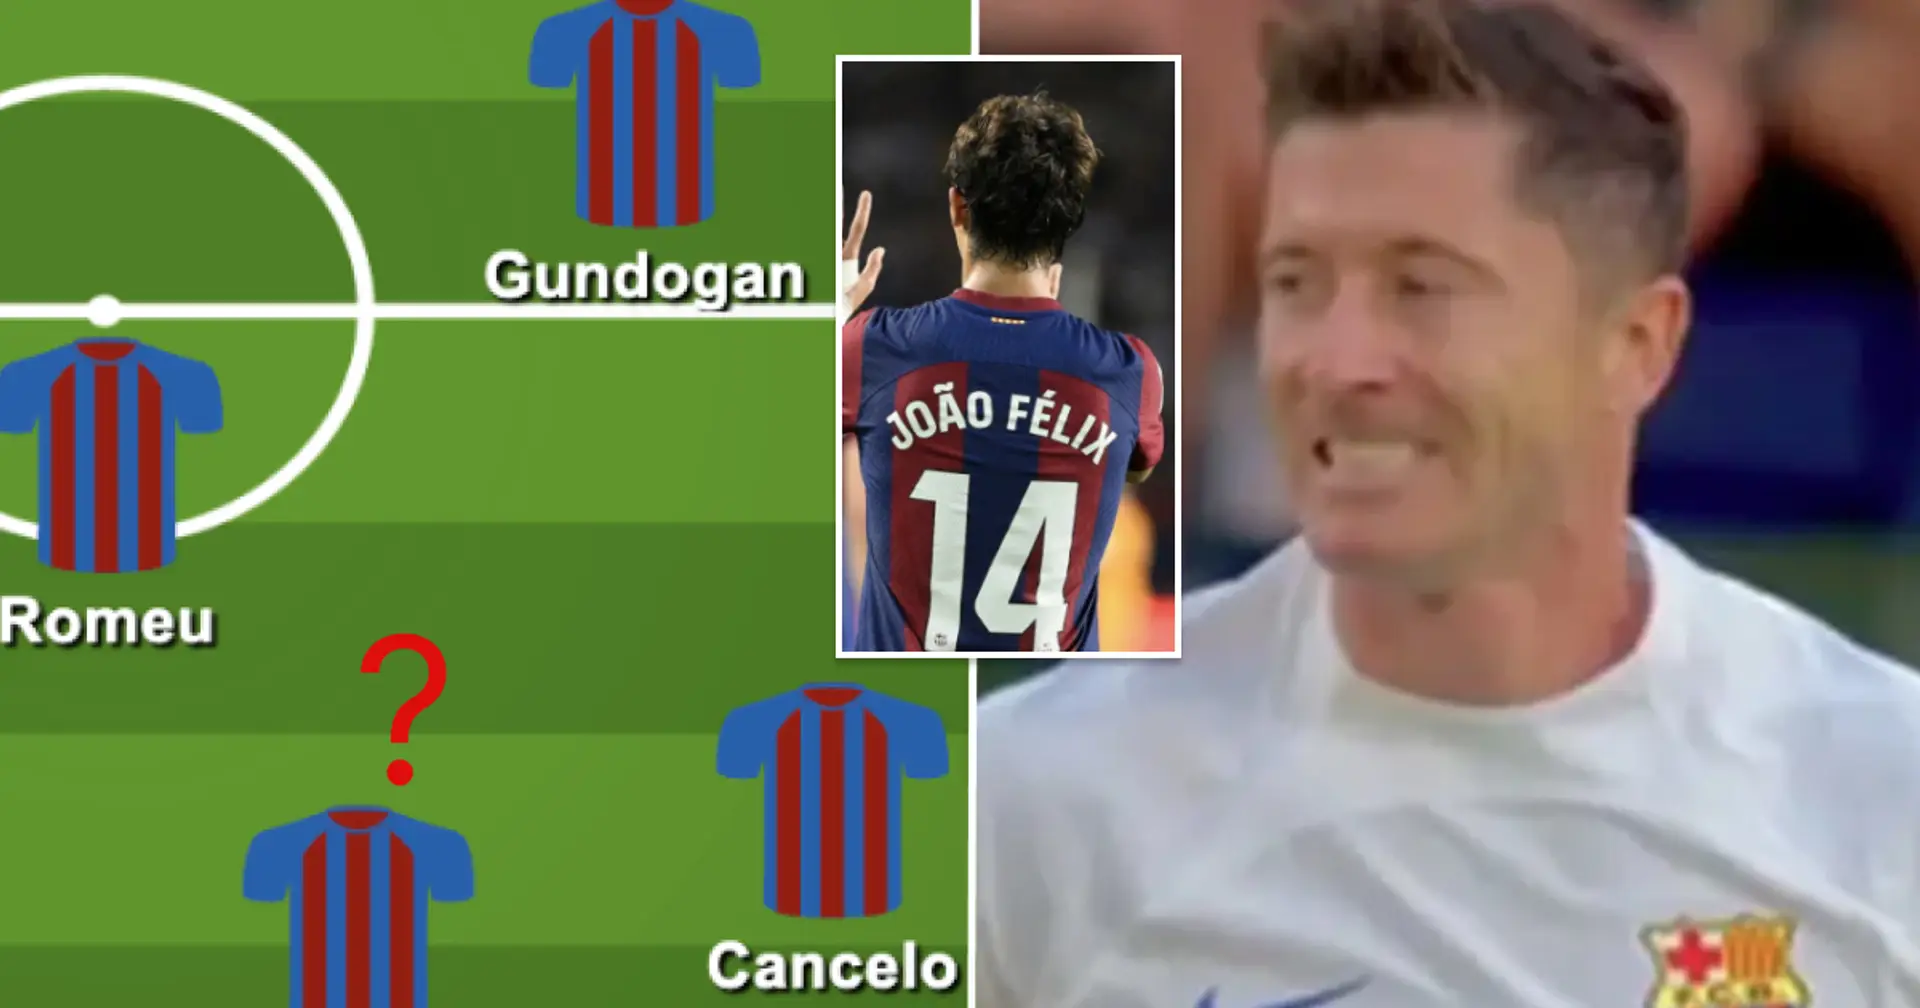 How could Barca lineup vs Celta with Lewandowski 'rested': 2 options